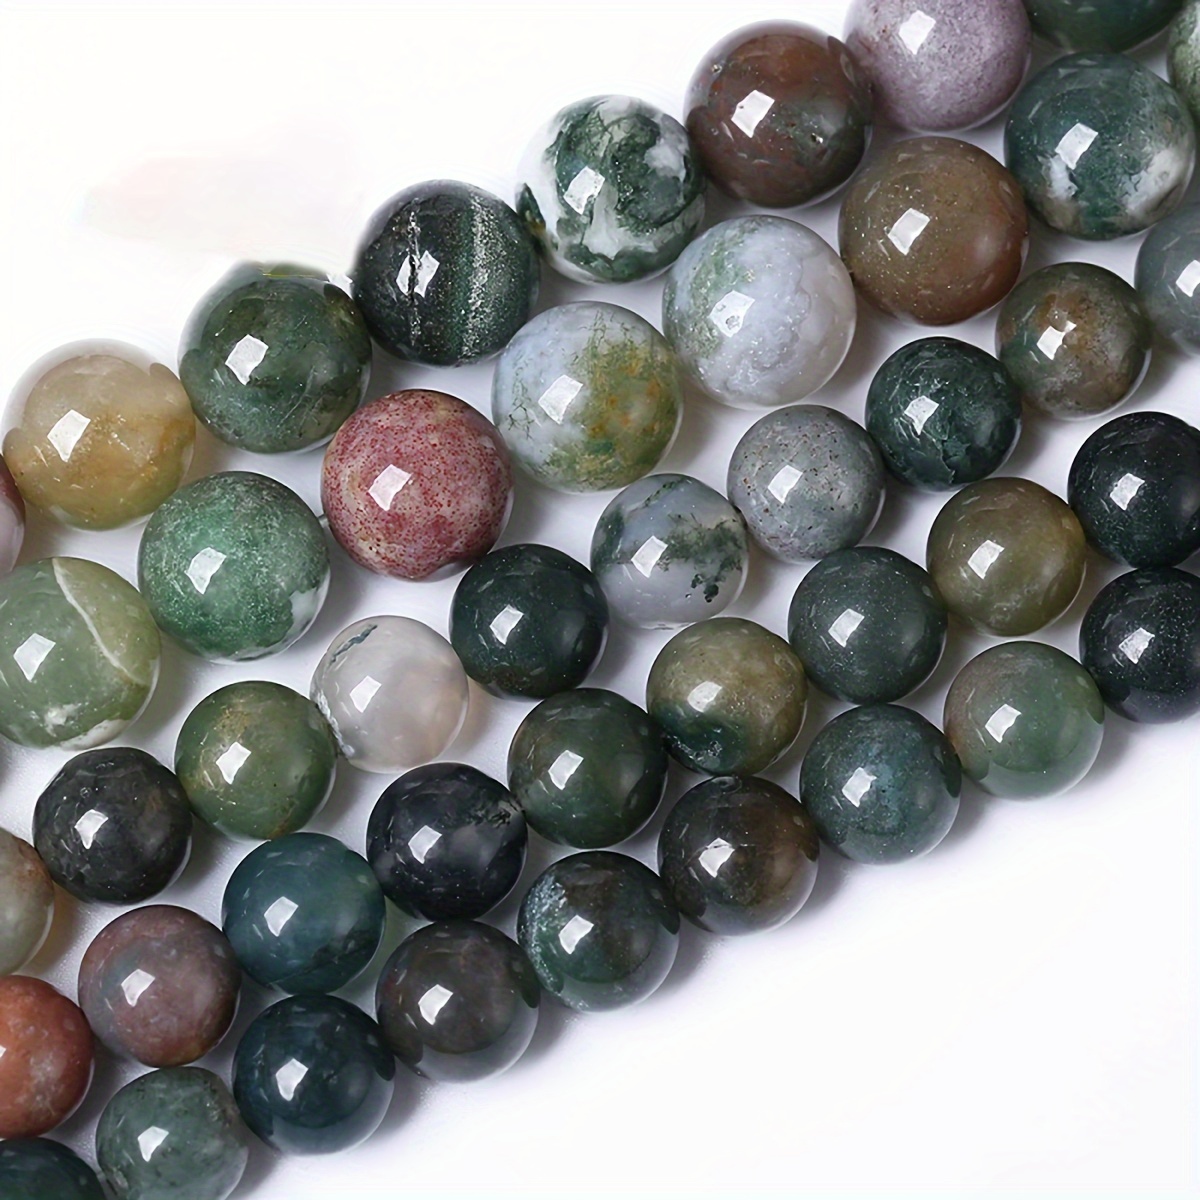 

Natural Stone Beads Indian Agate Round Loose Spacer Beads For Artificial Jewelry Making Diy Bracelet Accessories 15'' 1strand 4/6/8/10/12mm